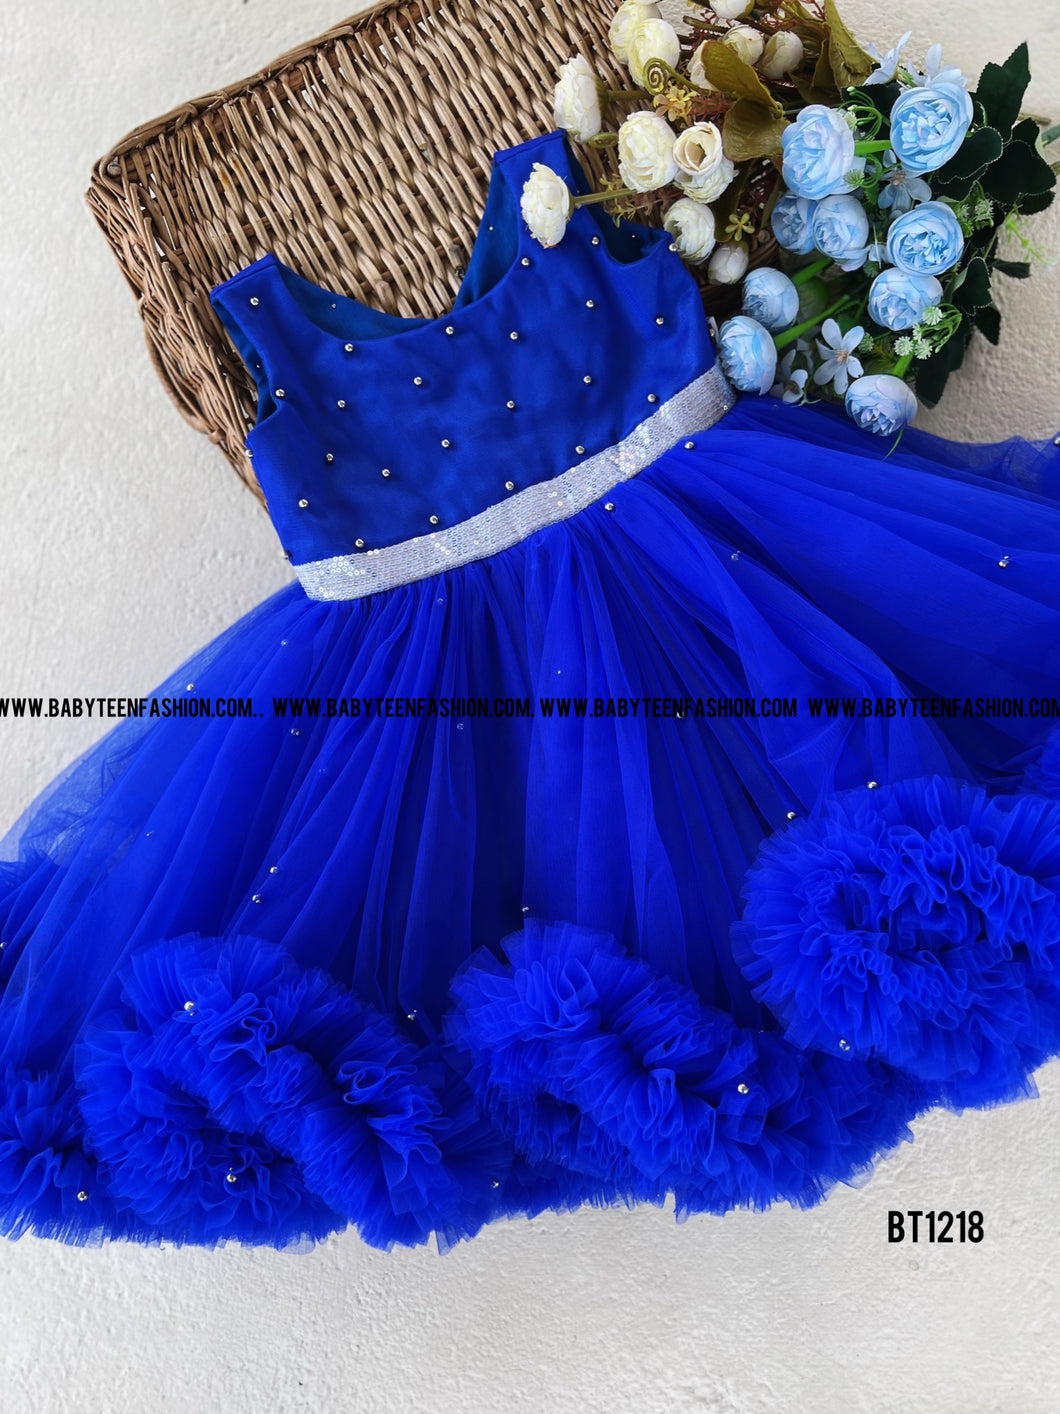 BT1218 Ruffled Party Wear Frock with Pearls